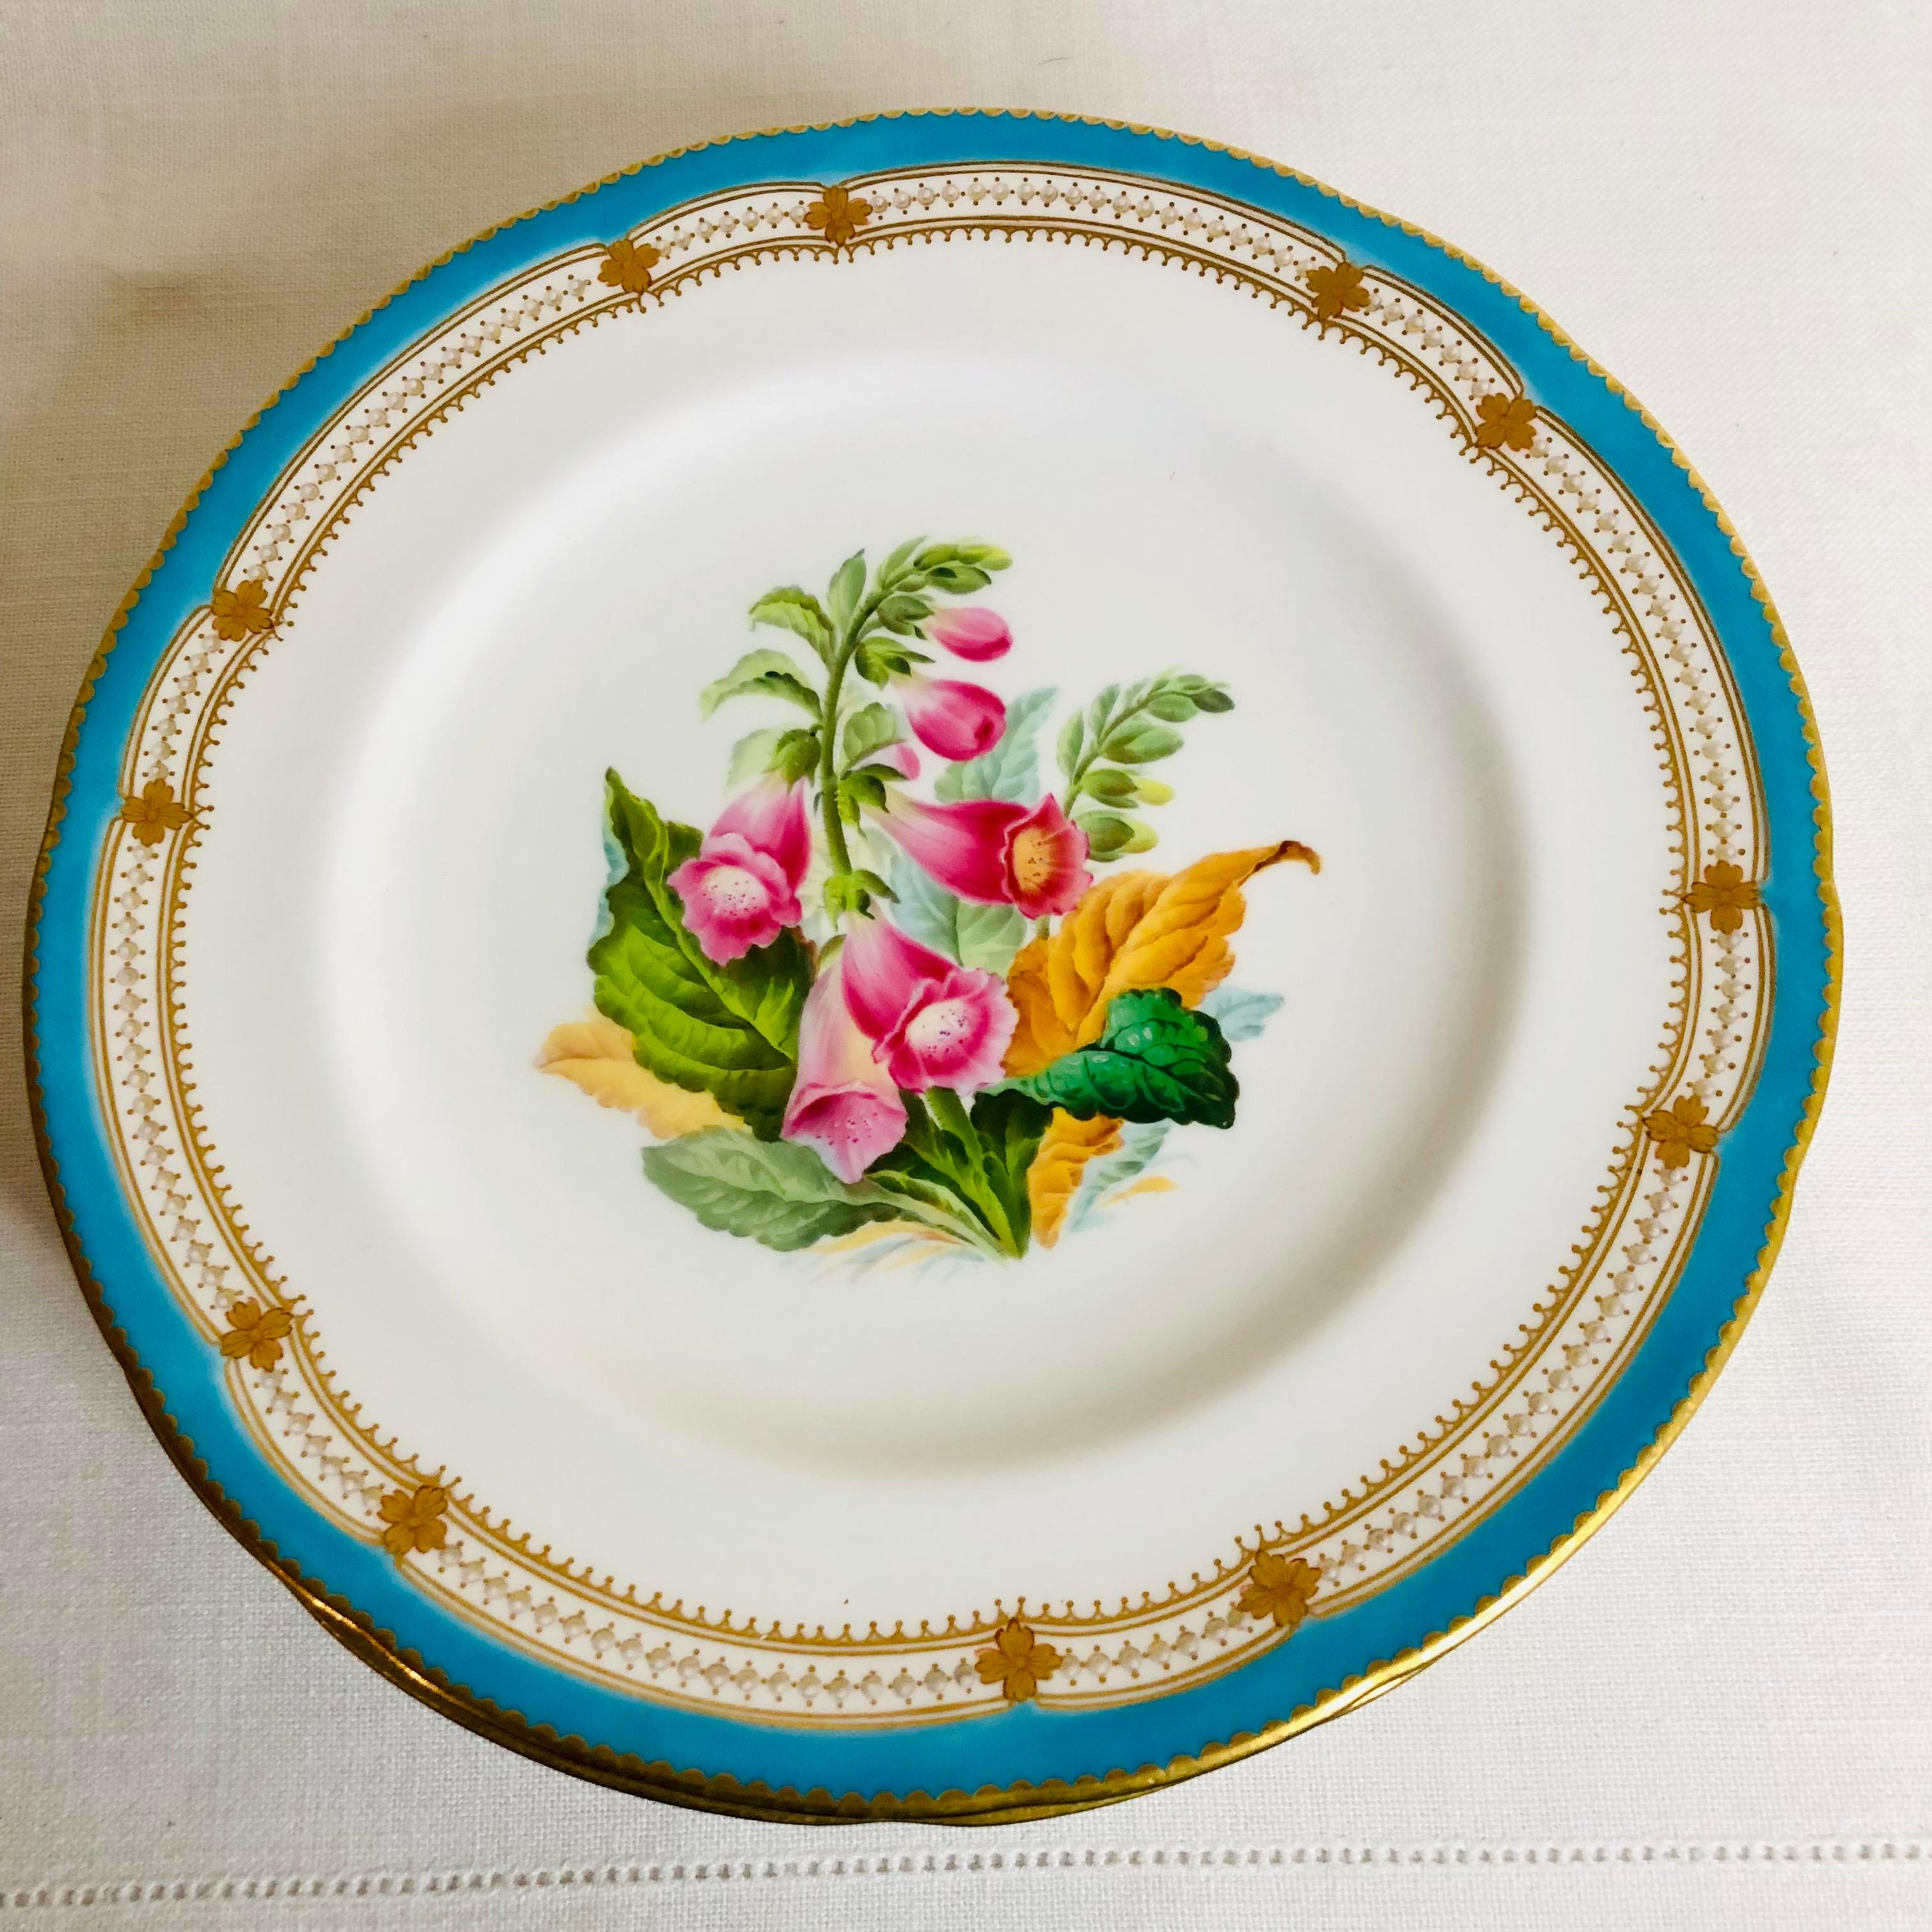 Set of 16 Rare Minton Plates Each Hand-Painted with a Different Flower Bouquet 6